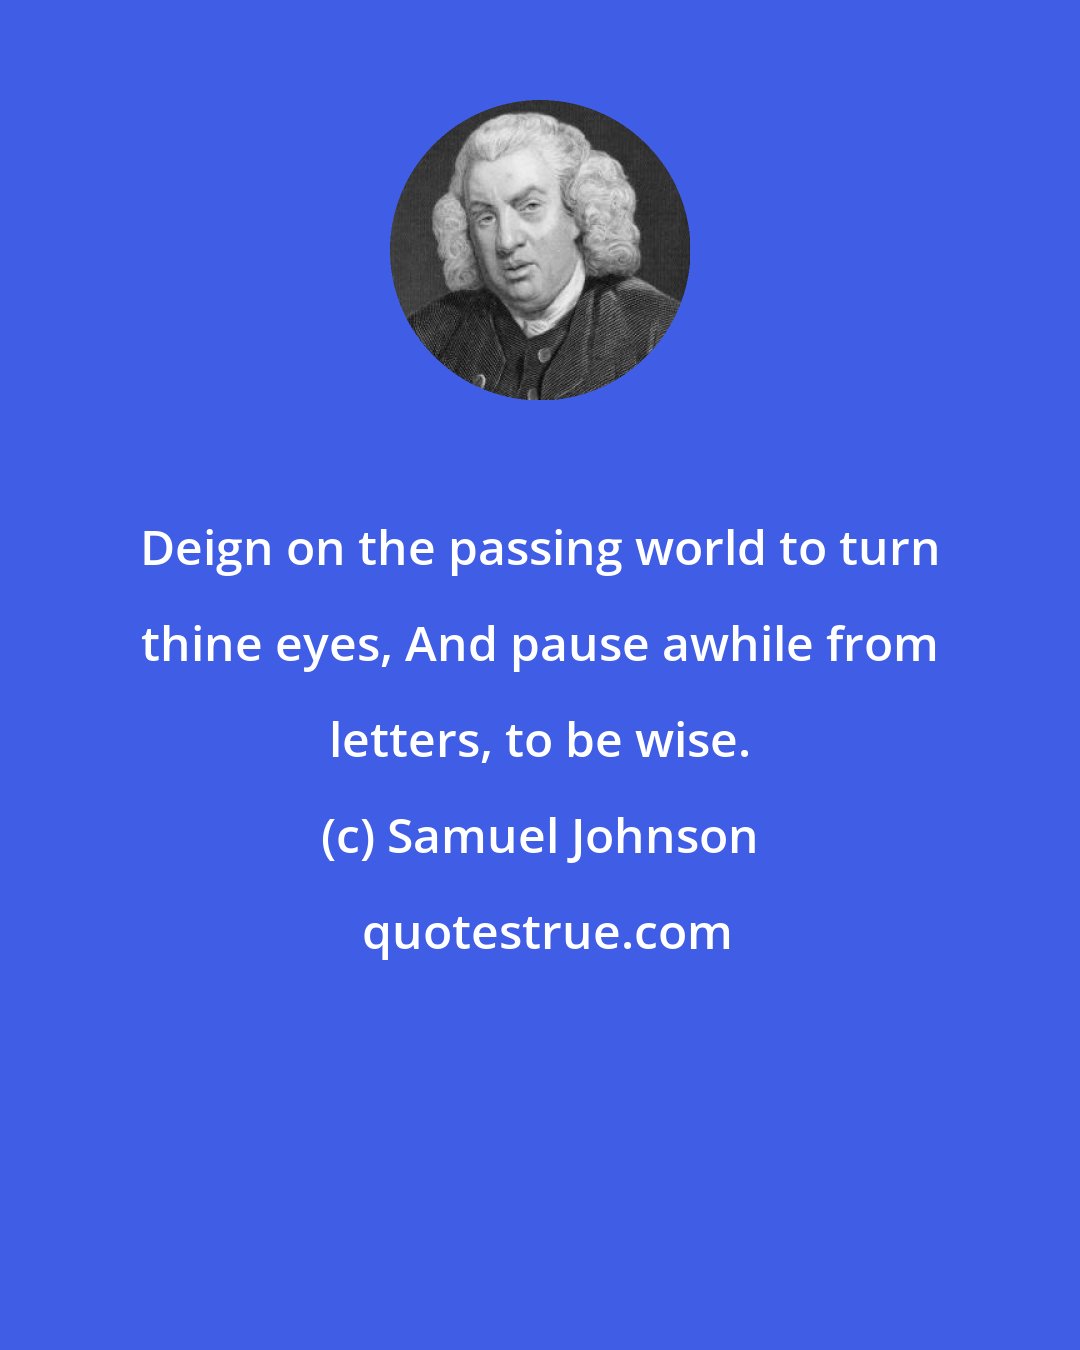 Samuel Johnson: Deign on the passing world to turn thine eyes, And pause awhile from letters, to be wise.